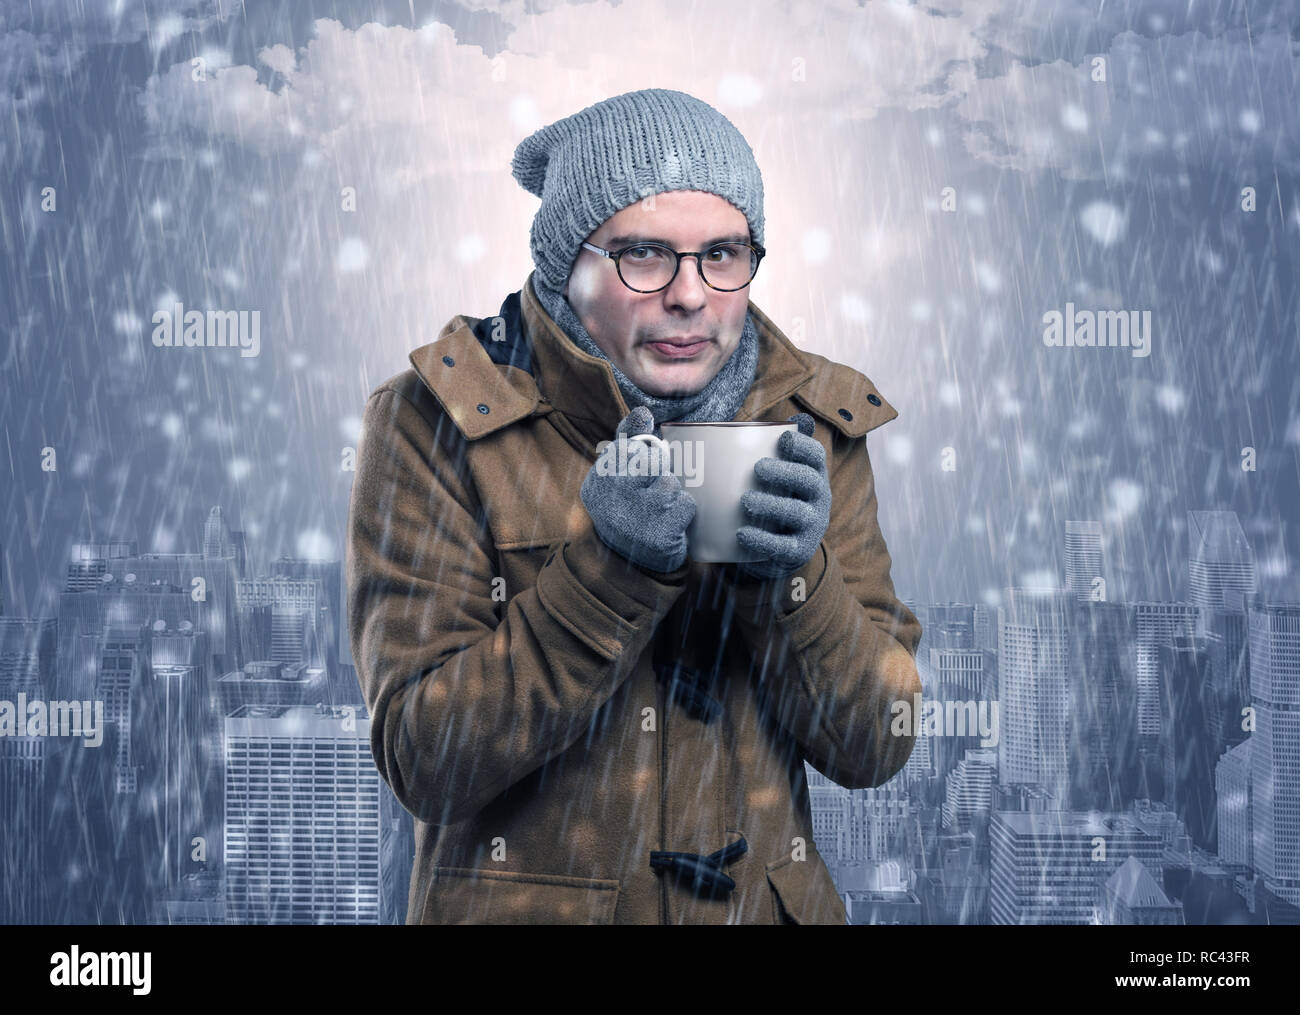 Young man freezing in warm clothing with city concept  Stock Photo